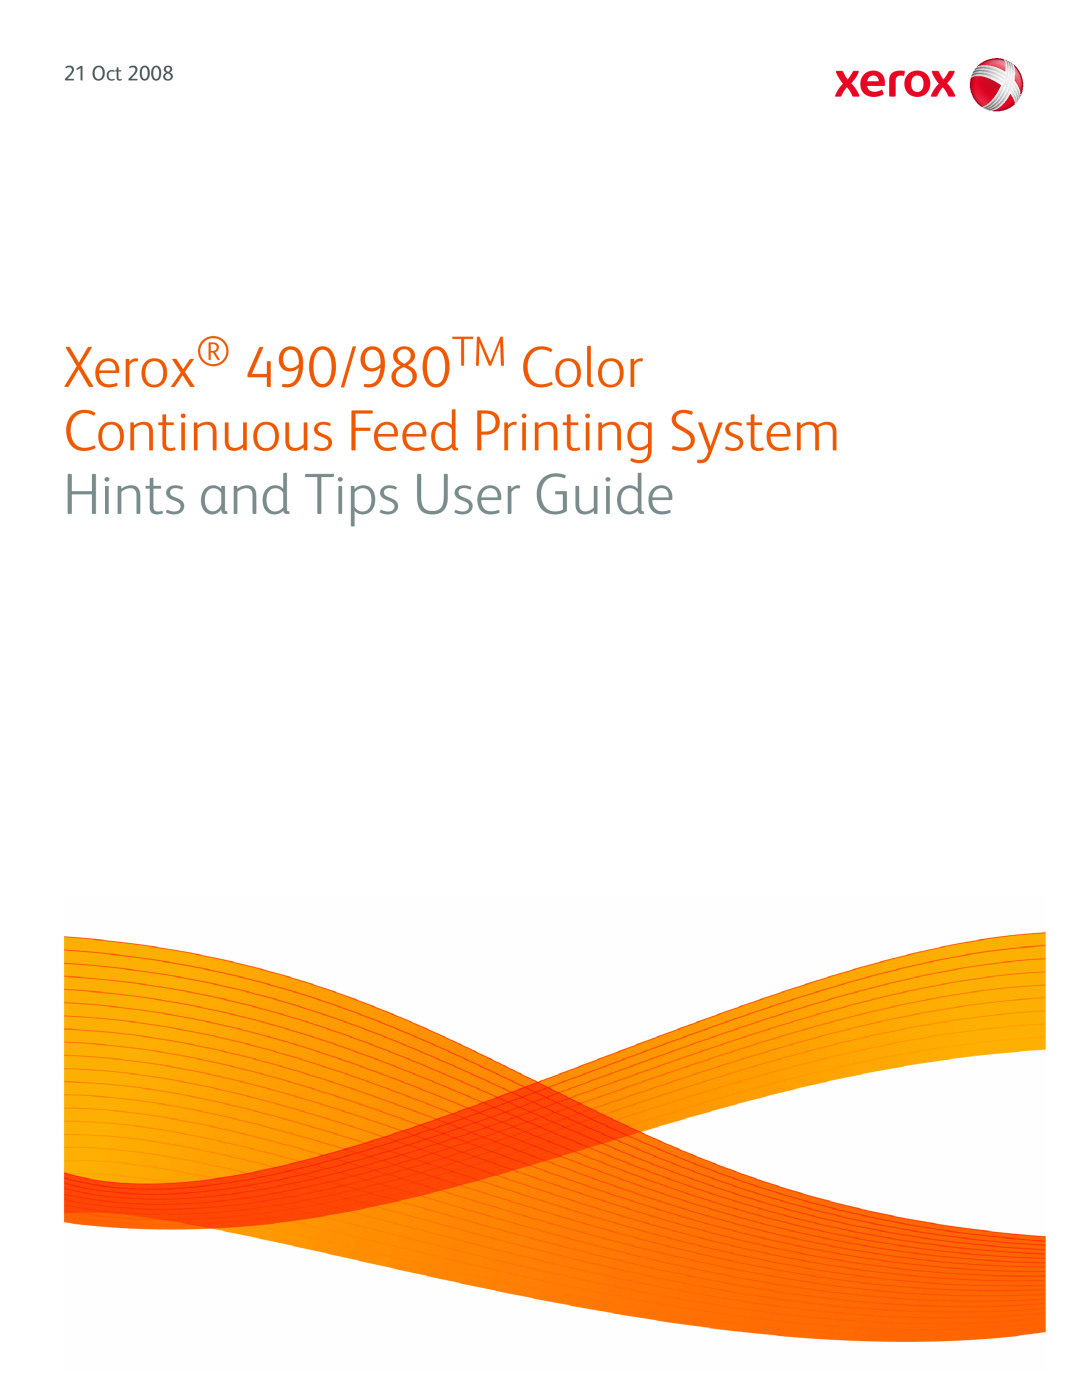 Xerox manual Xerox 490/980TM Color, Continuous Feed Printing System, Hints and Tips User Guide, 21 Oct 